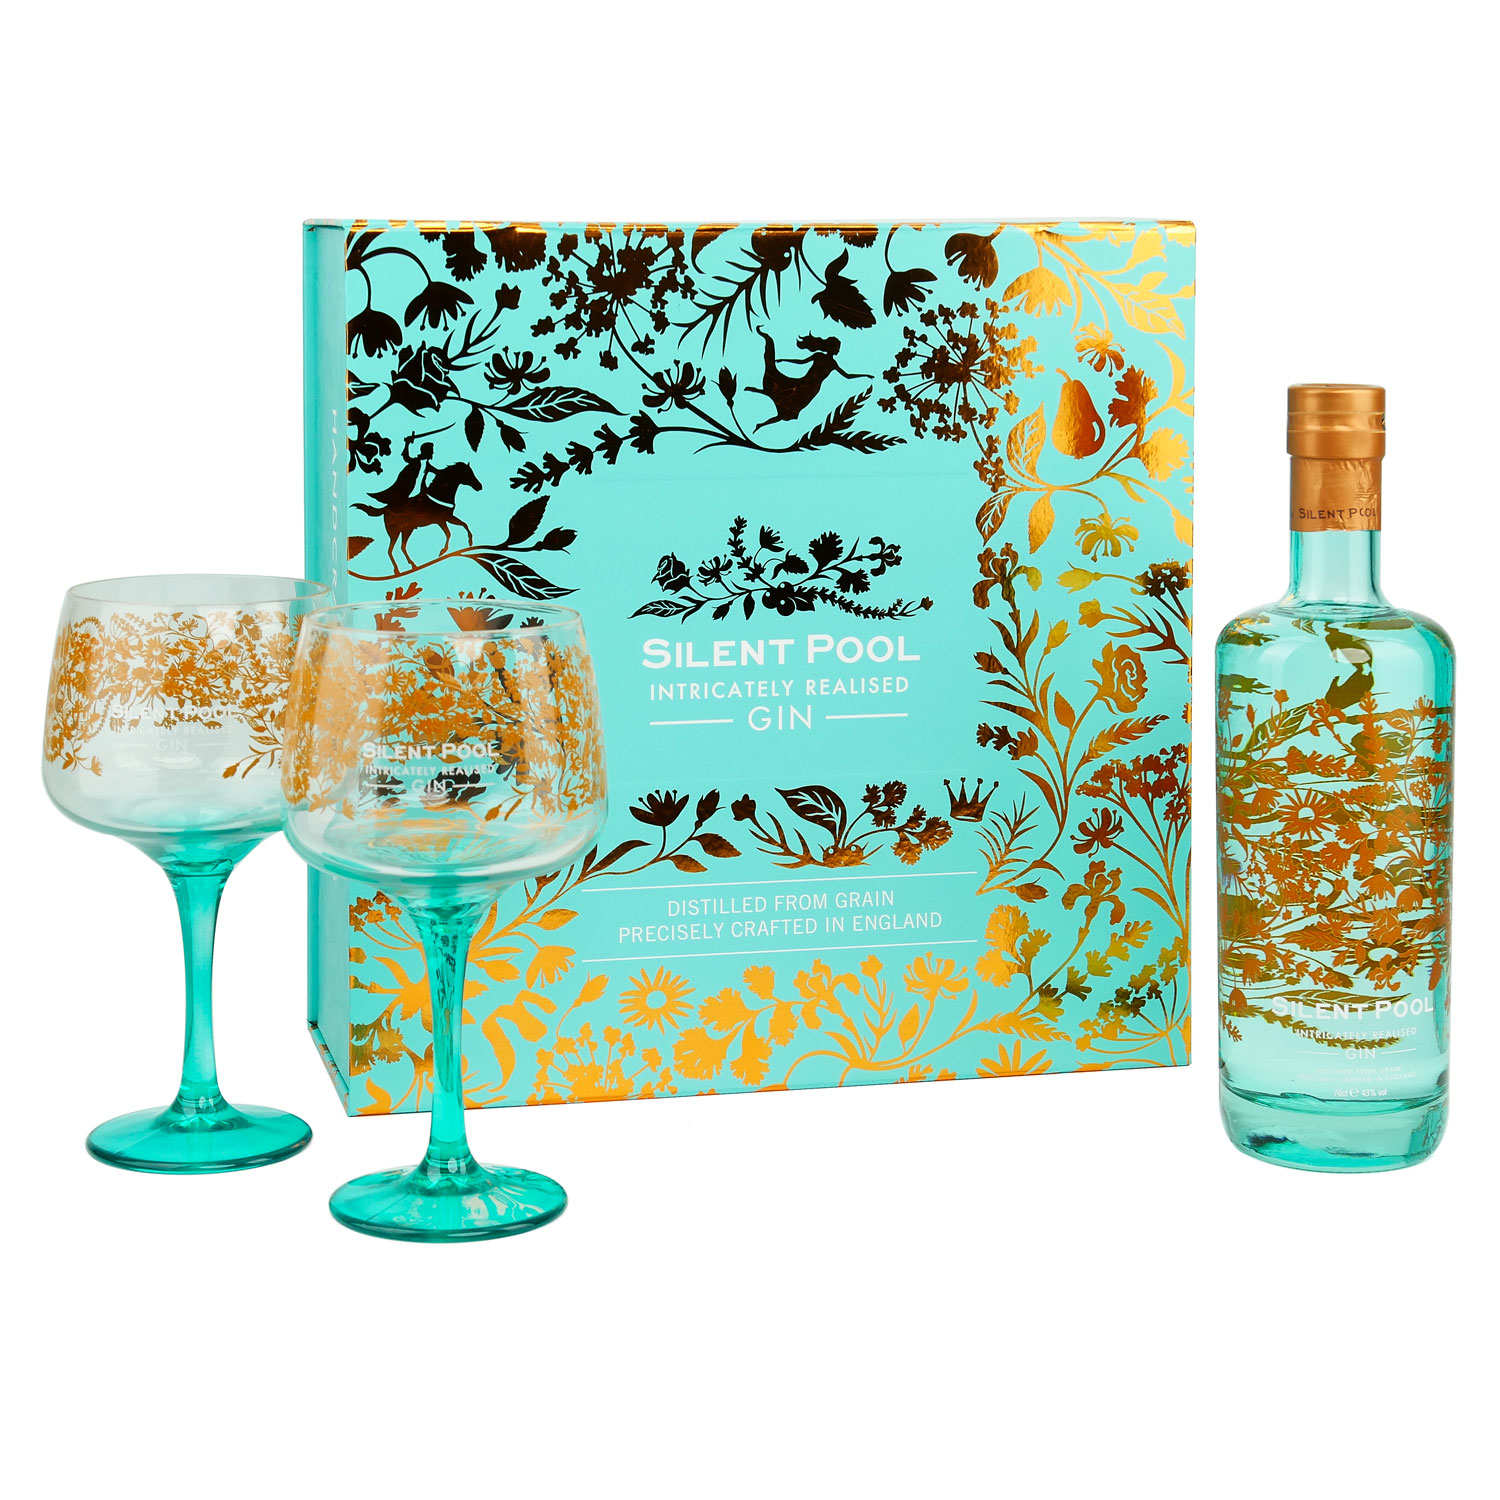 Coffret Gin Silent Pool 70cl + 2 verres - Gin d'Angleterre 43